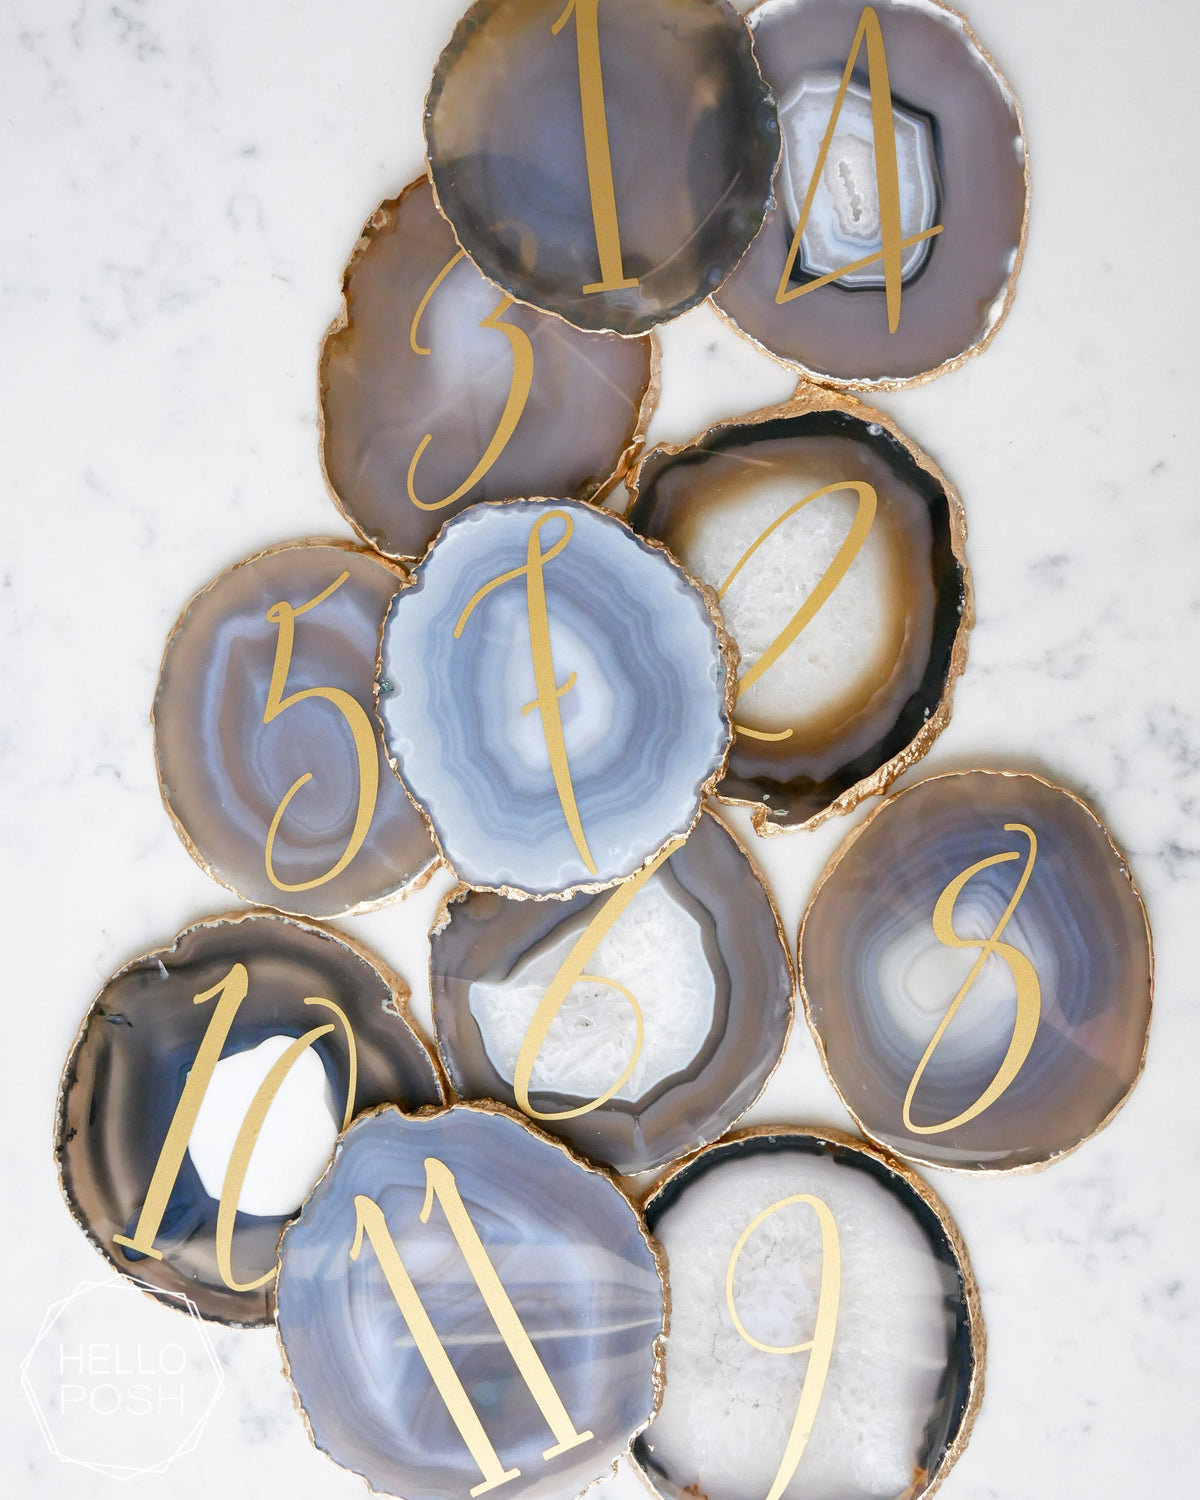 4" Agate Slice Table Number